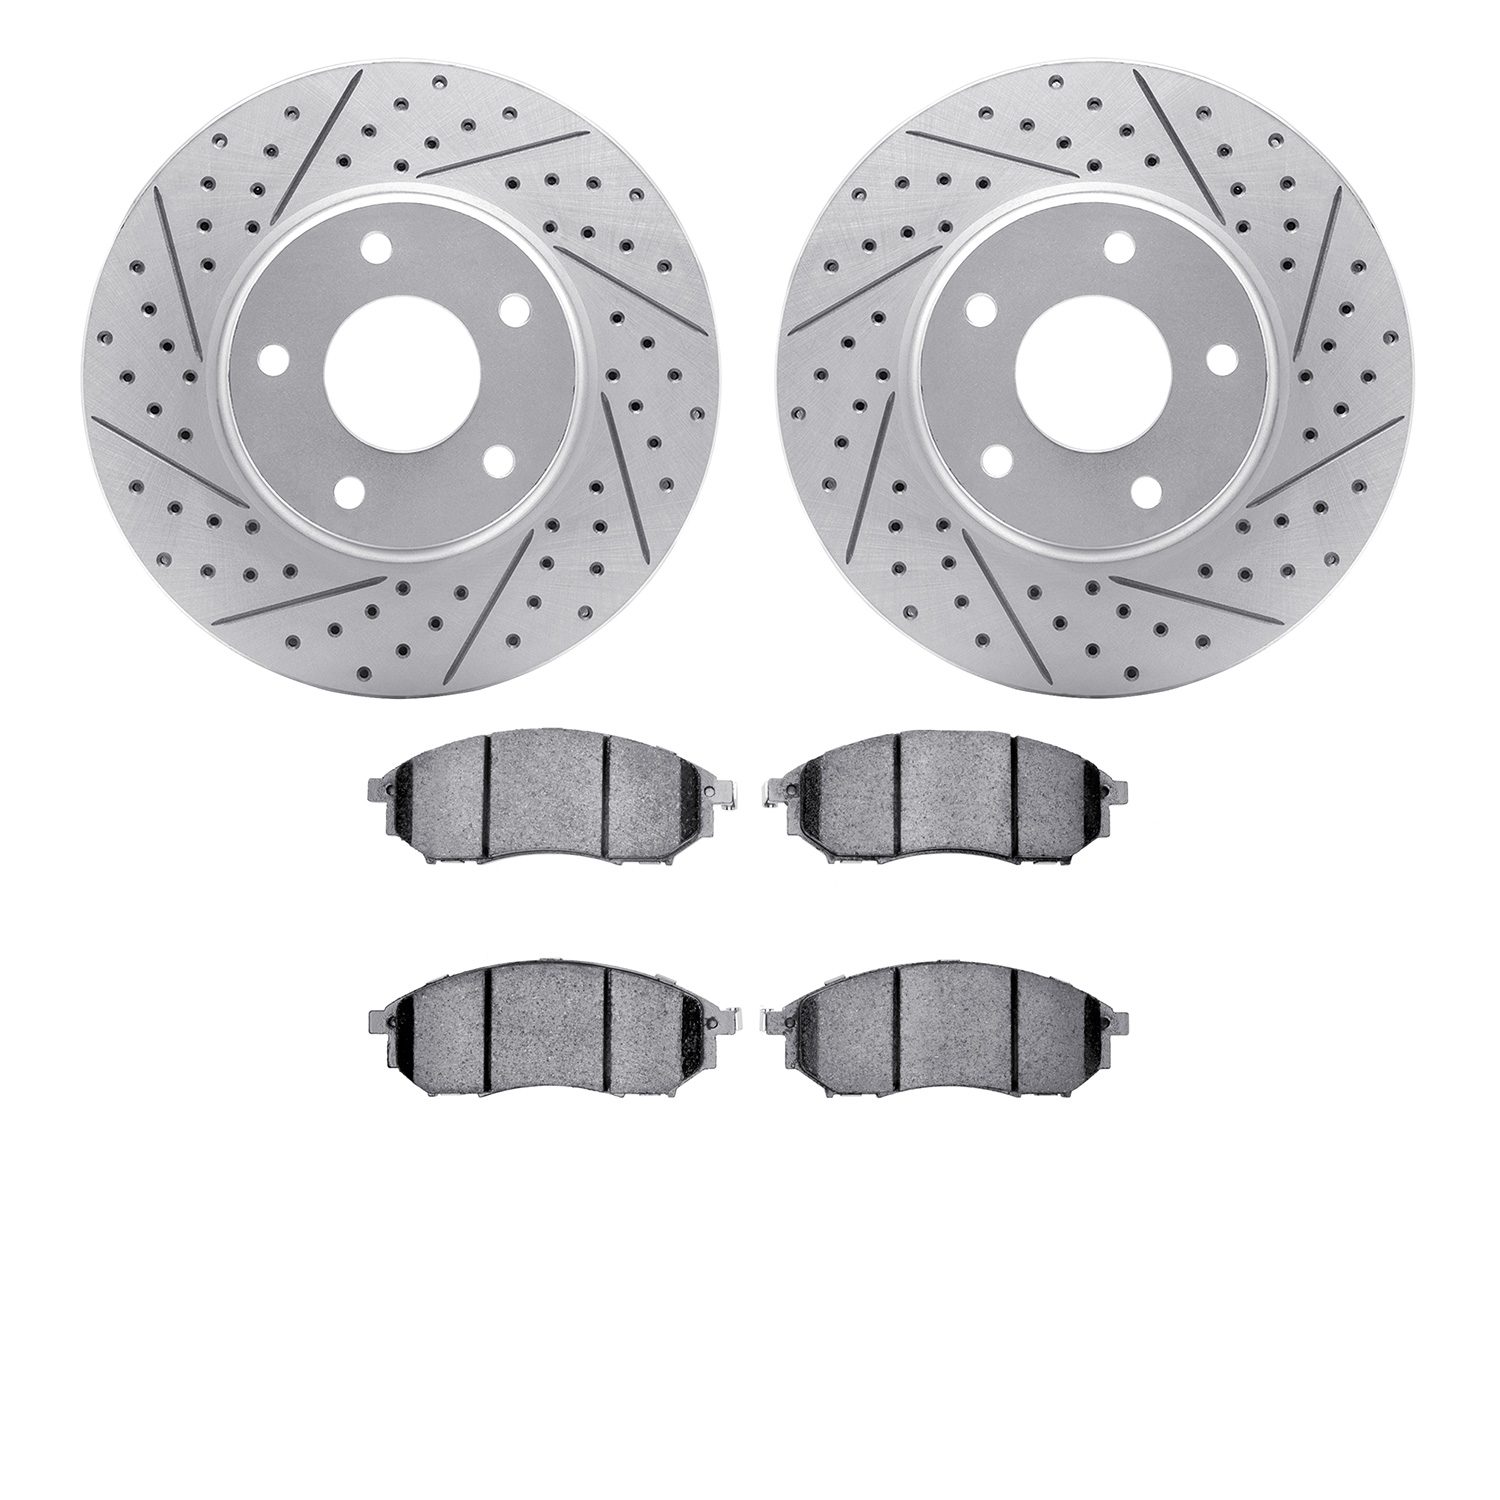 2502-67047 Geoperformance Drilled/Slotted Rotors w/5000 Advanced Brake Pads Kit, 2002-2006 Infiniti/Nissan, Position: Front